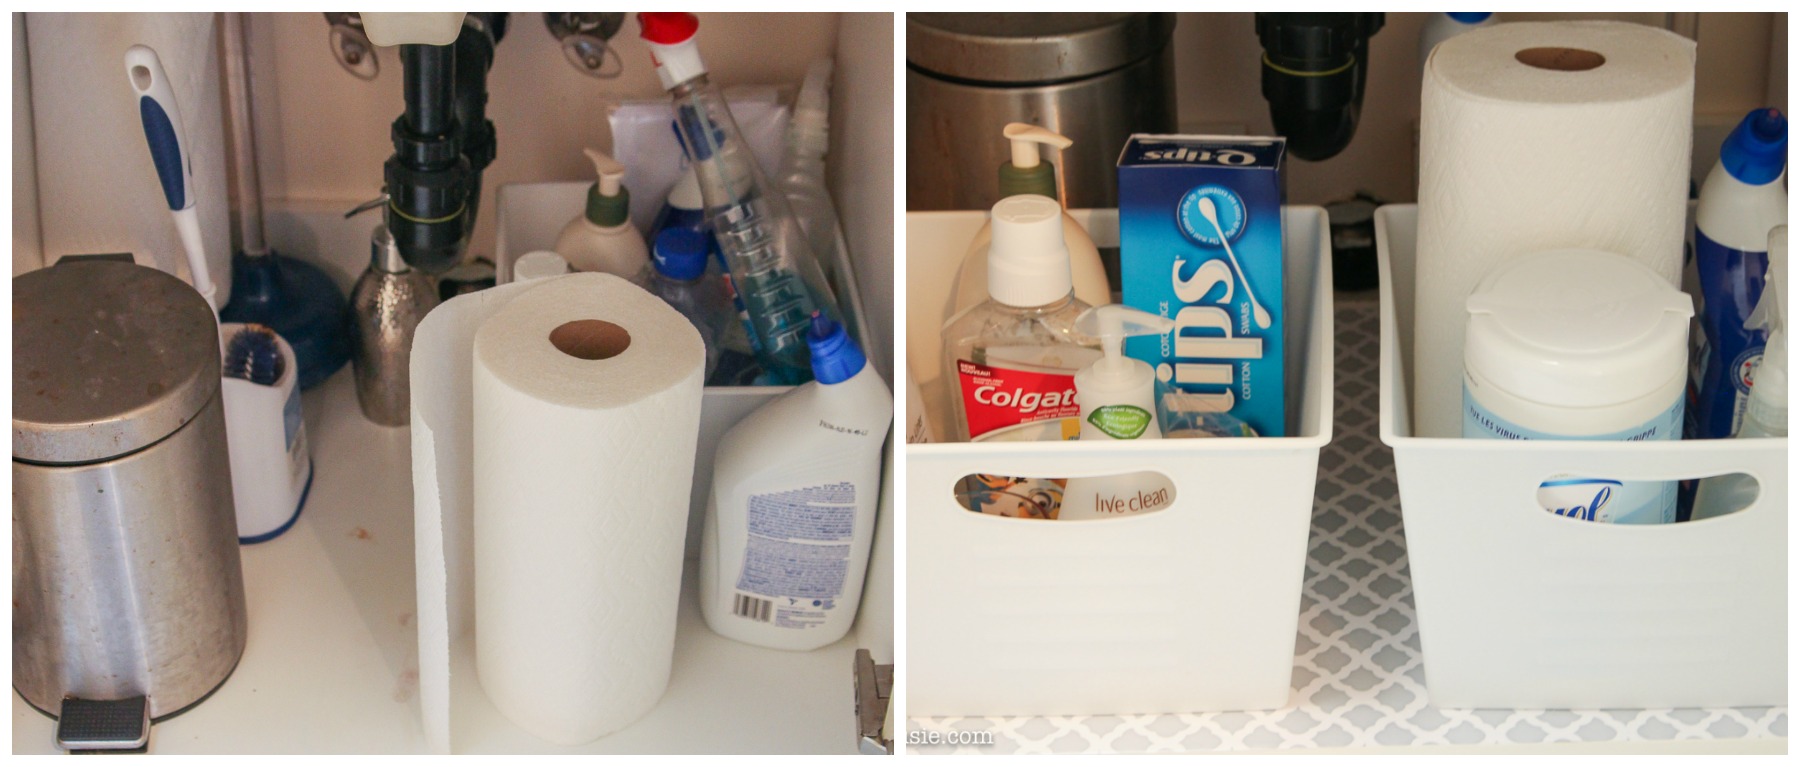 How to Organize Bathroom Cleaning Supplies